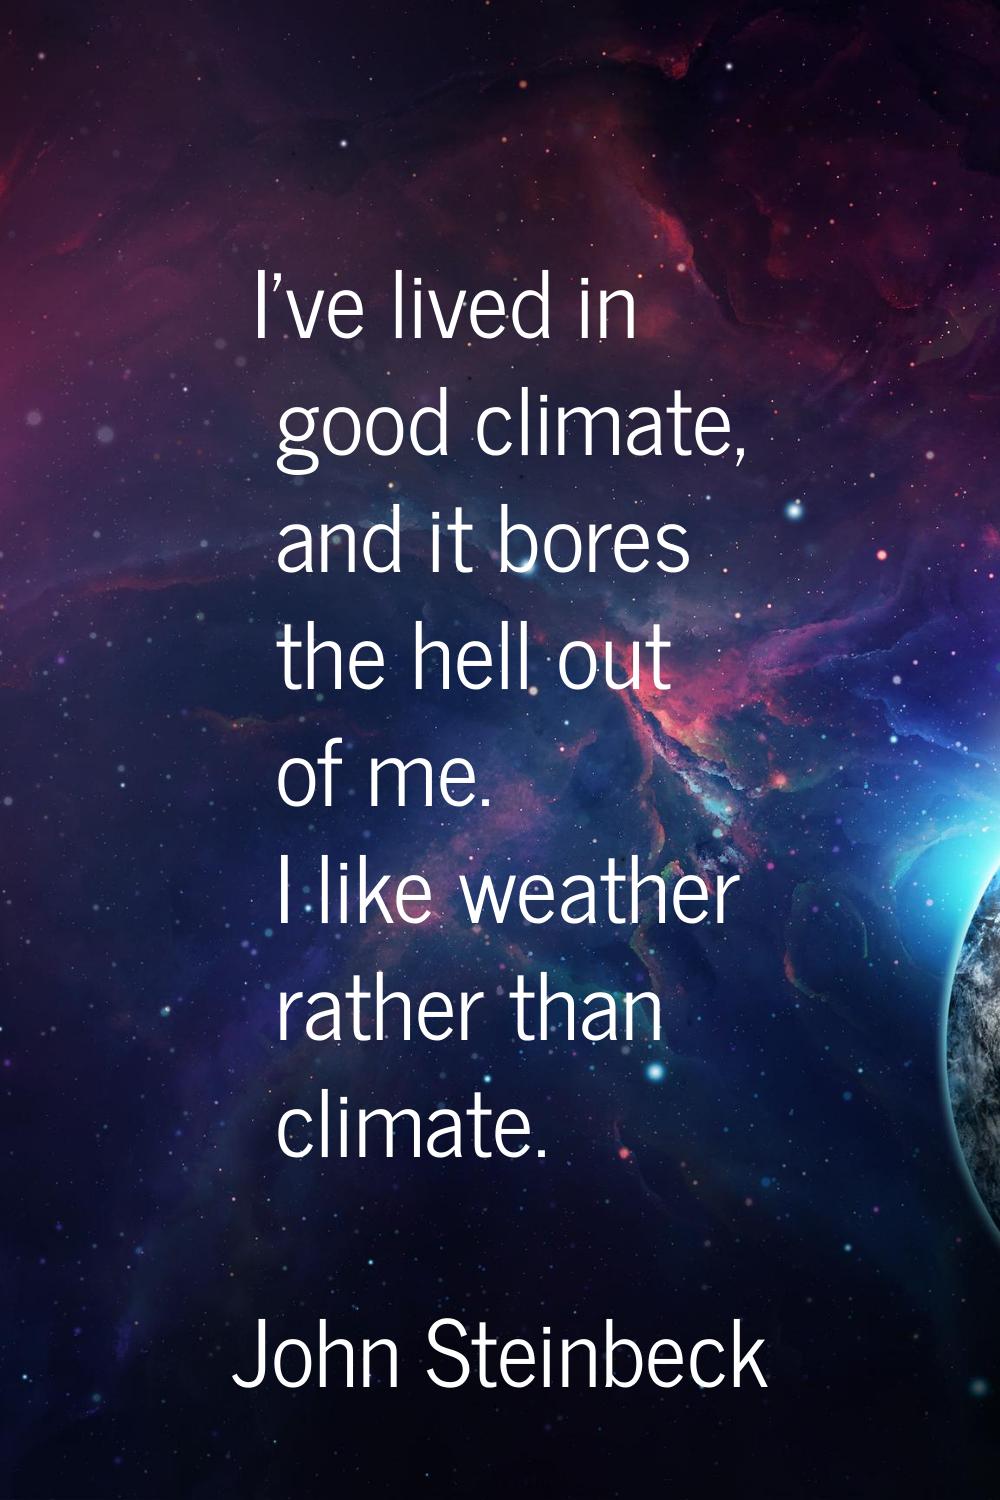 I've lived in good climate, and it bores the hell out of me. I like weather rather than climate.